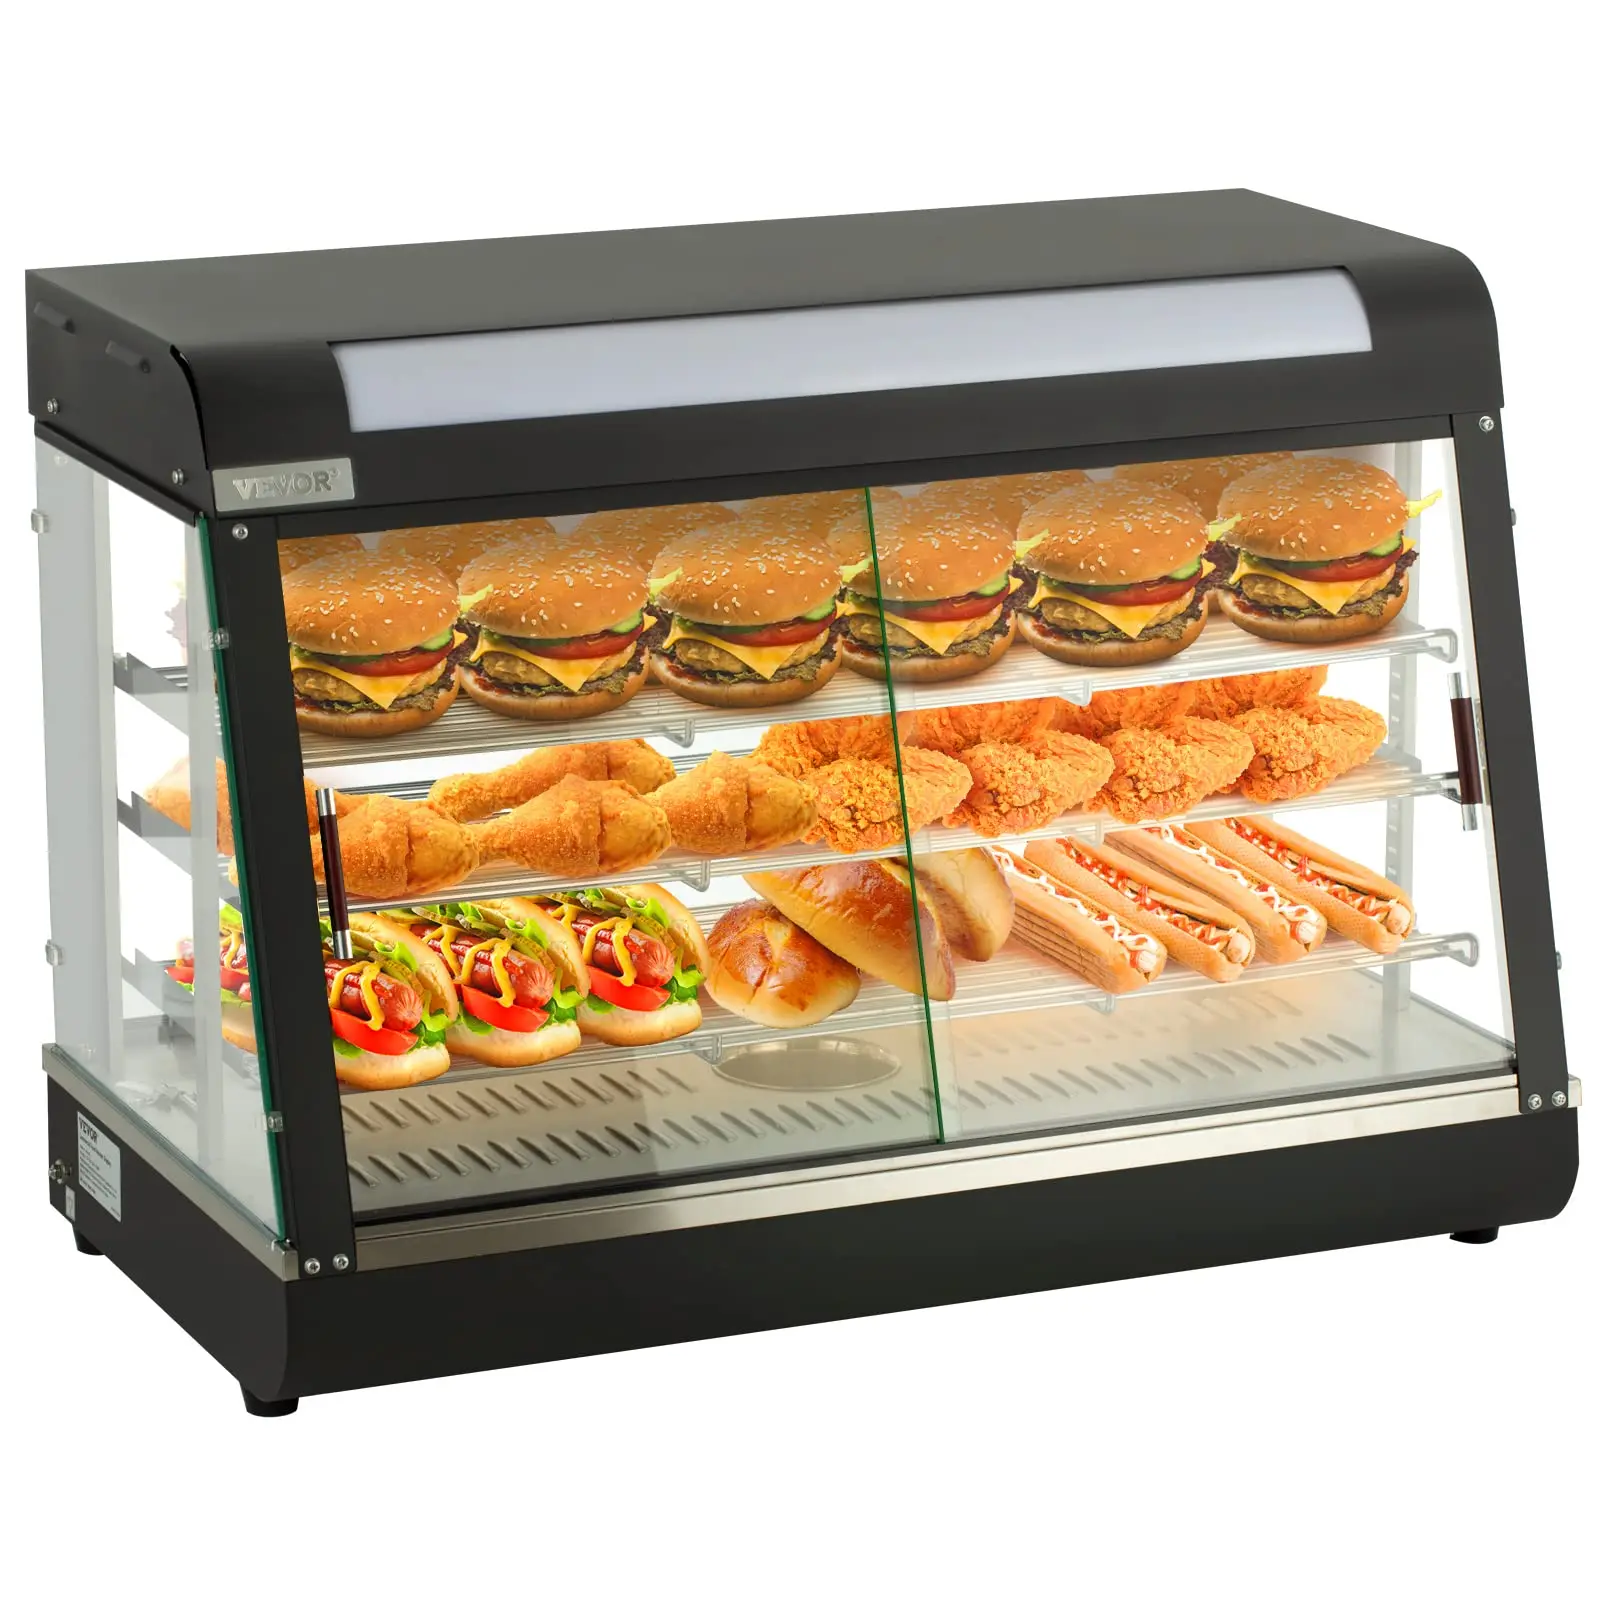 

Commercial Food Warmer Display, 3 Tiers, 1800W Pizza Warmer w/ 3D Heating 3-Color Lighting Bottom Fan, Countertop Pastry